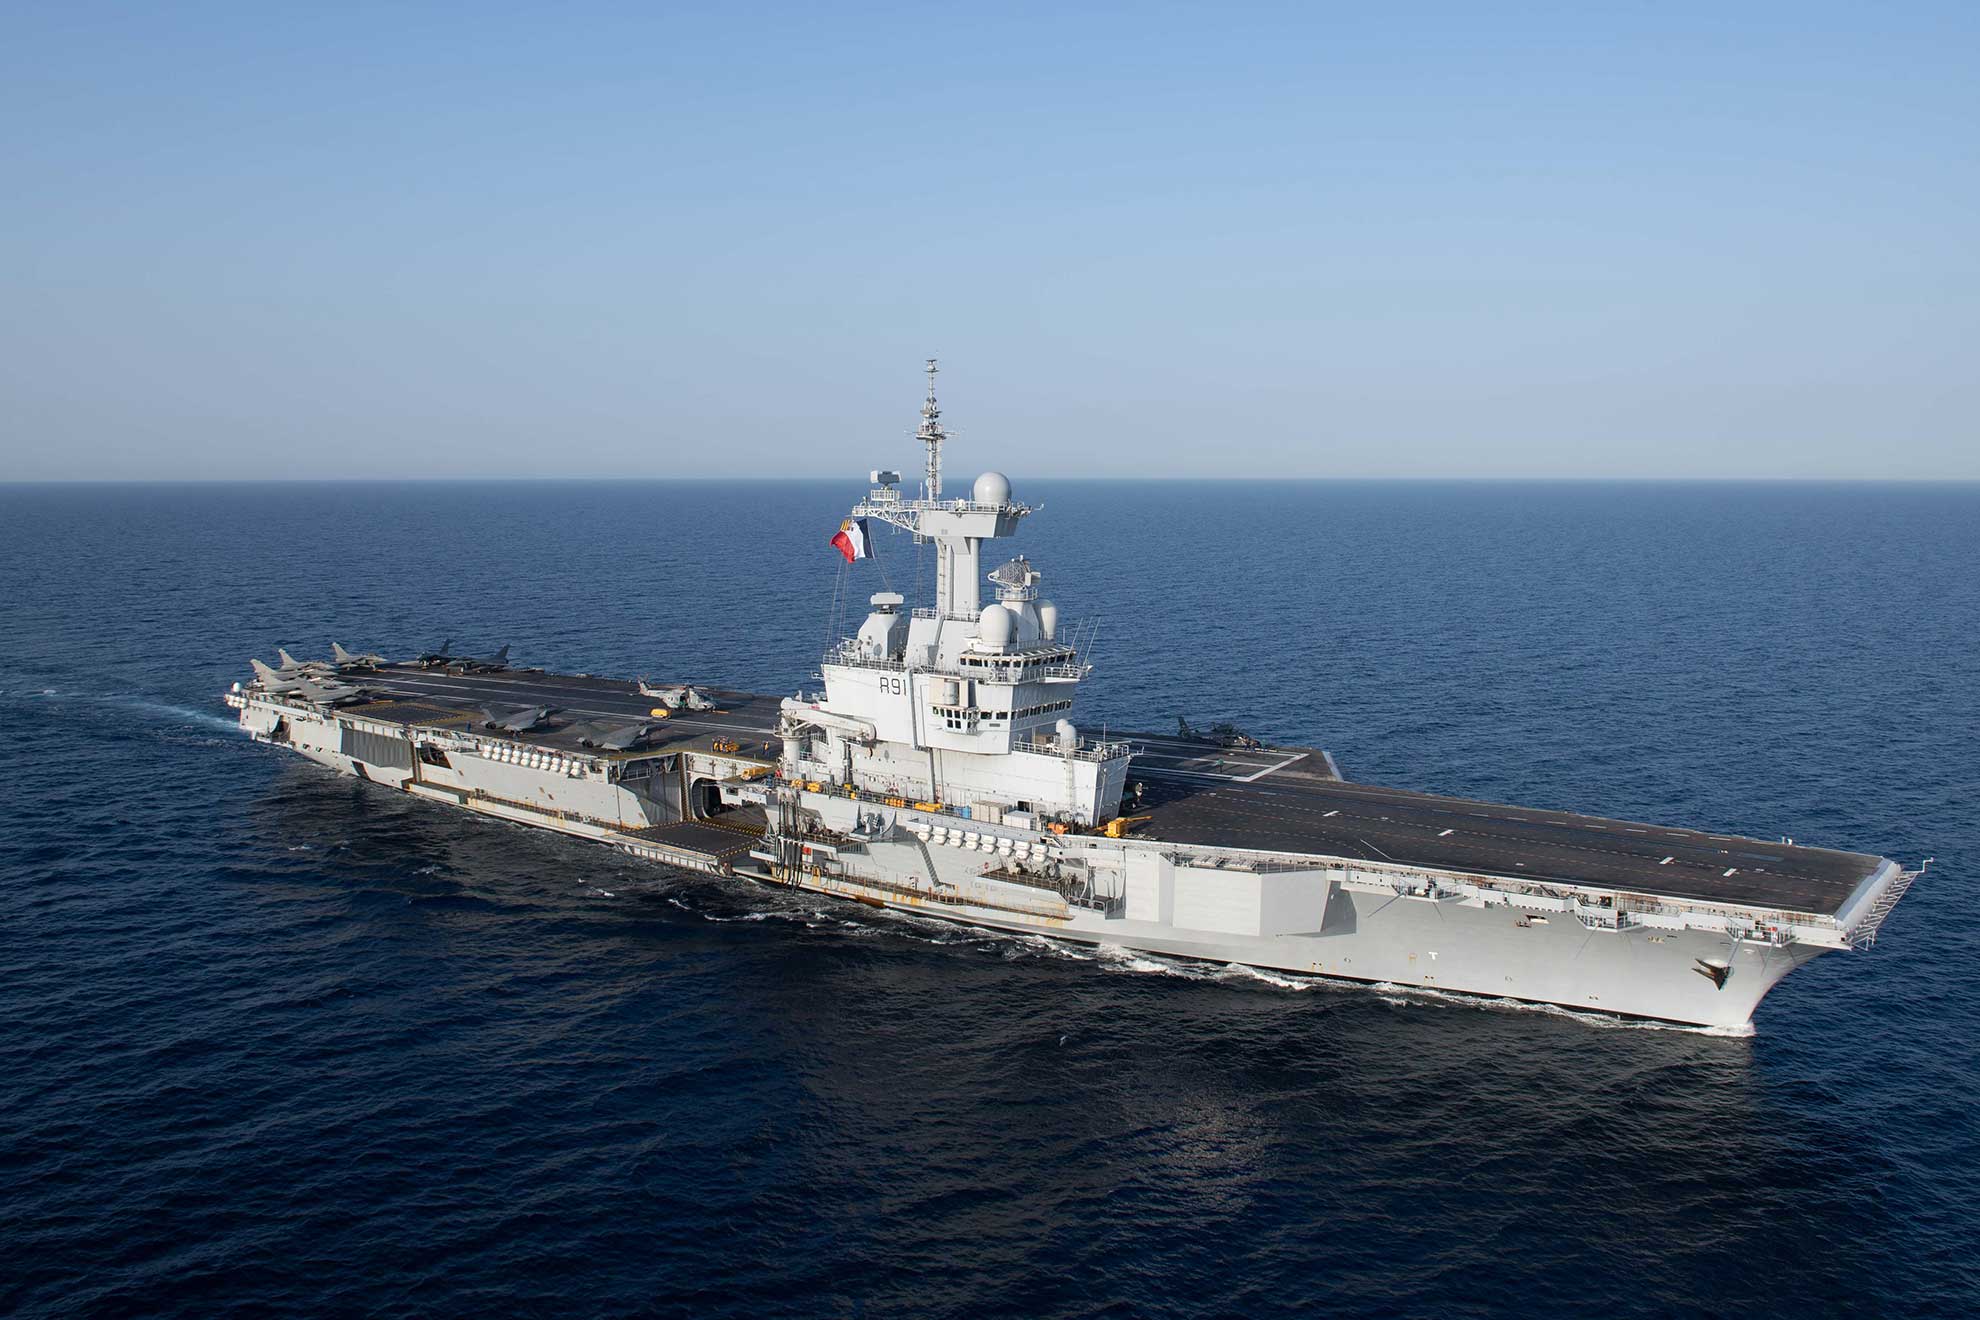 Red Sea (April 15, 2019) The French Marine Nationale aircraft carrier FS Charles De Gaulle (R91) transits the Red Sea, April 15, 2019. The John C. Stennis Carrier Strike Group is deployed to the U.S. 5th Fleet area of operations in support of naval operations to ensure maritime stability and security in the Central Region, connecting the Mediterranean and the Pacific through the western Indian Ocean and three strategic choke points -- U.S. Navy photo by MCS Seaman Joshua L. Leonard. -